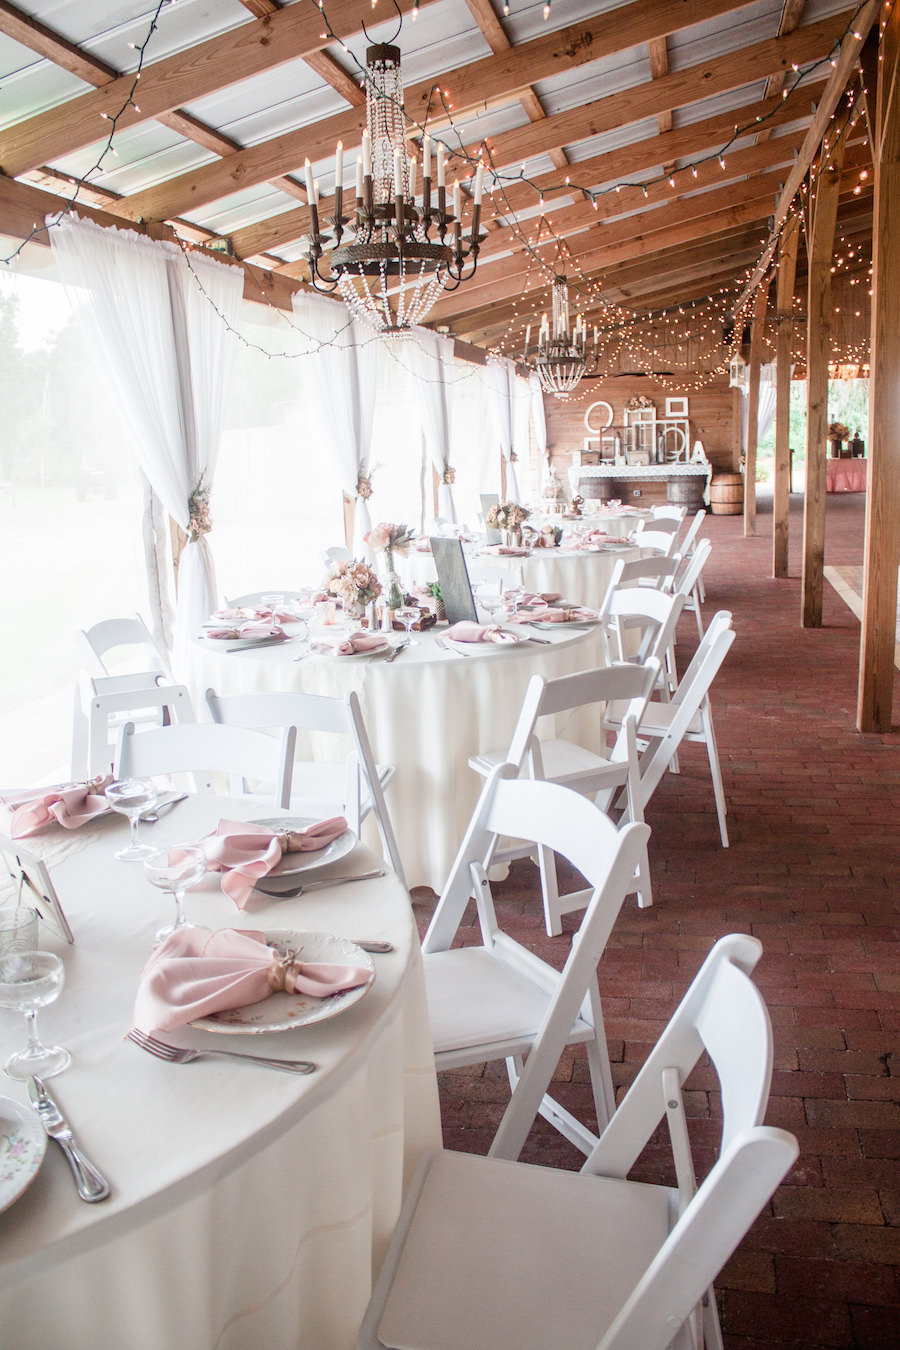 Vintage Wedding Reception Decor with Pink Table Linens, Hanging Chandelier and String Lighting at Tampa BayWedding Venue Cross Creek Ranch